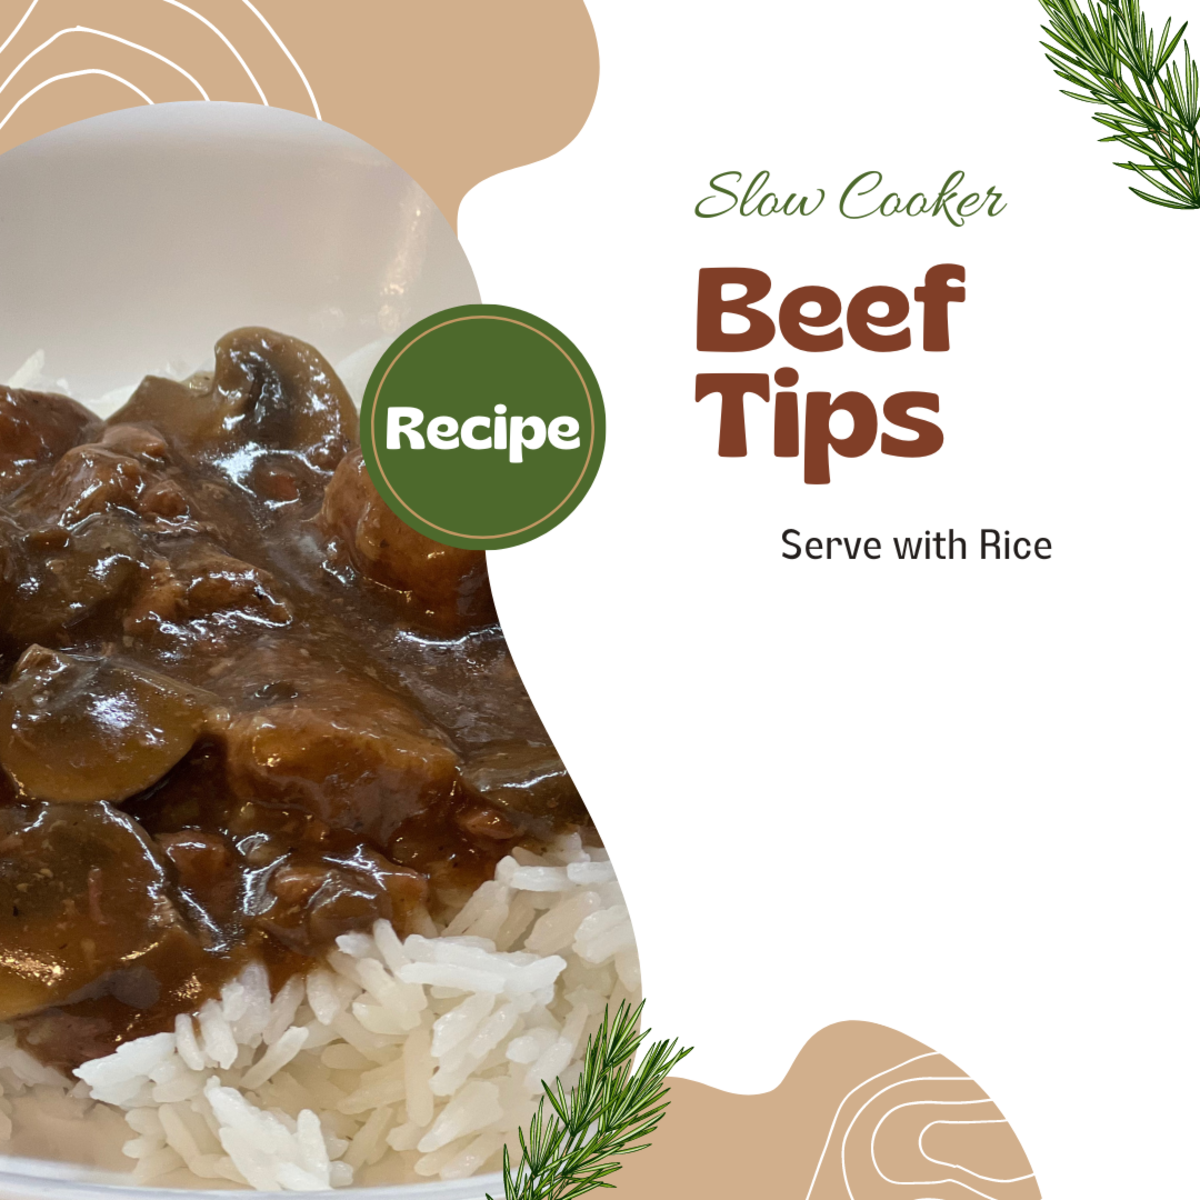 Slow Cooker Beef Tips With Rice